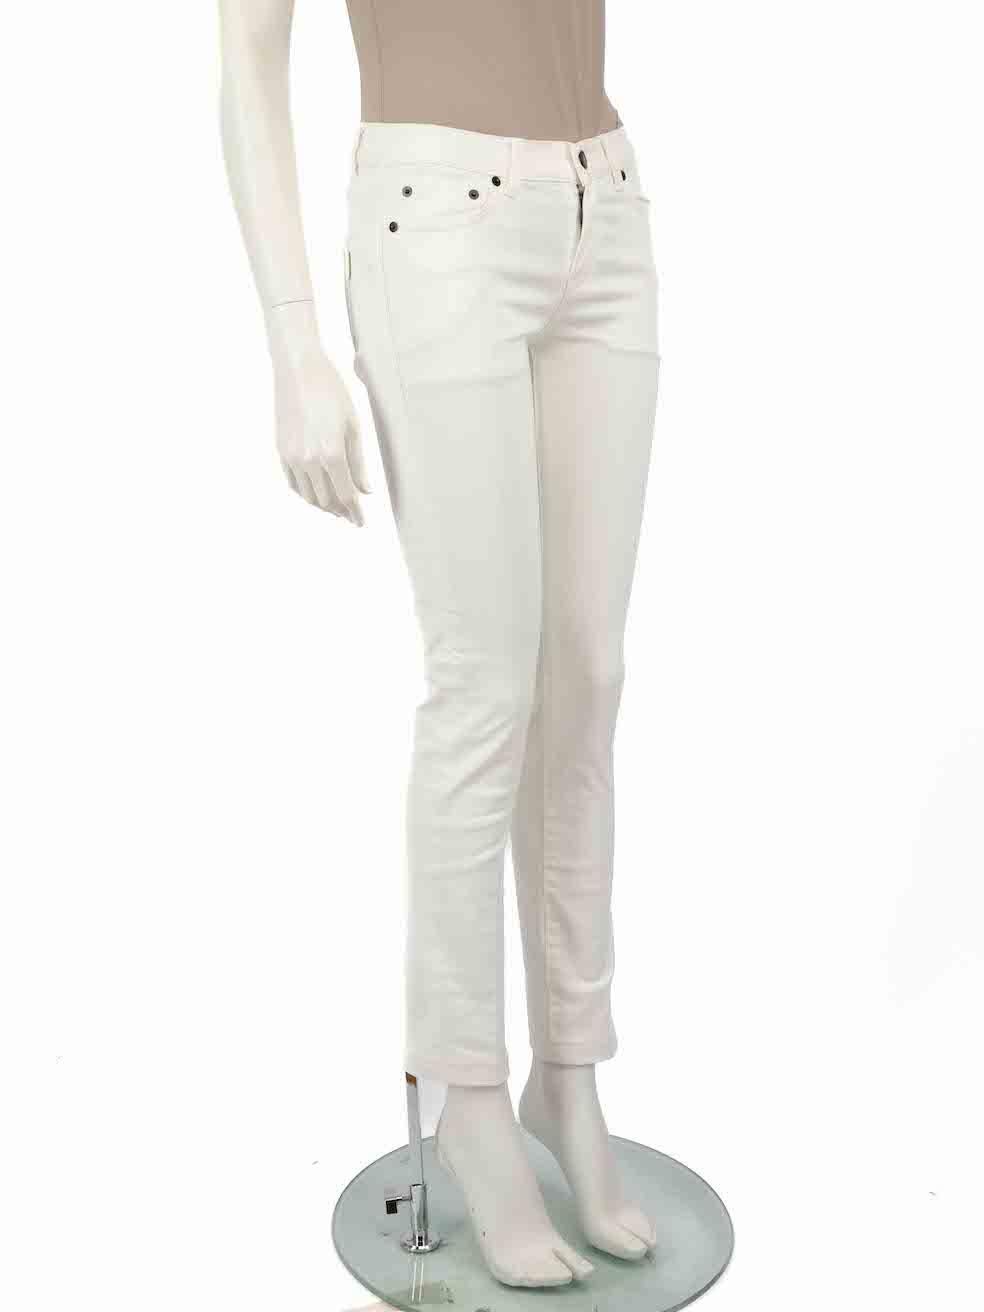 CONDITION is Very good. Hardly any visible wear to jeans is evident on this used Saint Laurent designer resale item.
 
 
 
 Details
 
 
 White
 
 Denim
 
 Jeans
 
 Skinny fit
 
 Mid rise
 
 3x Front pockets
 
 2x Back pockets
 
 Fly zip and button